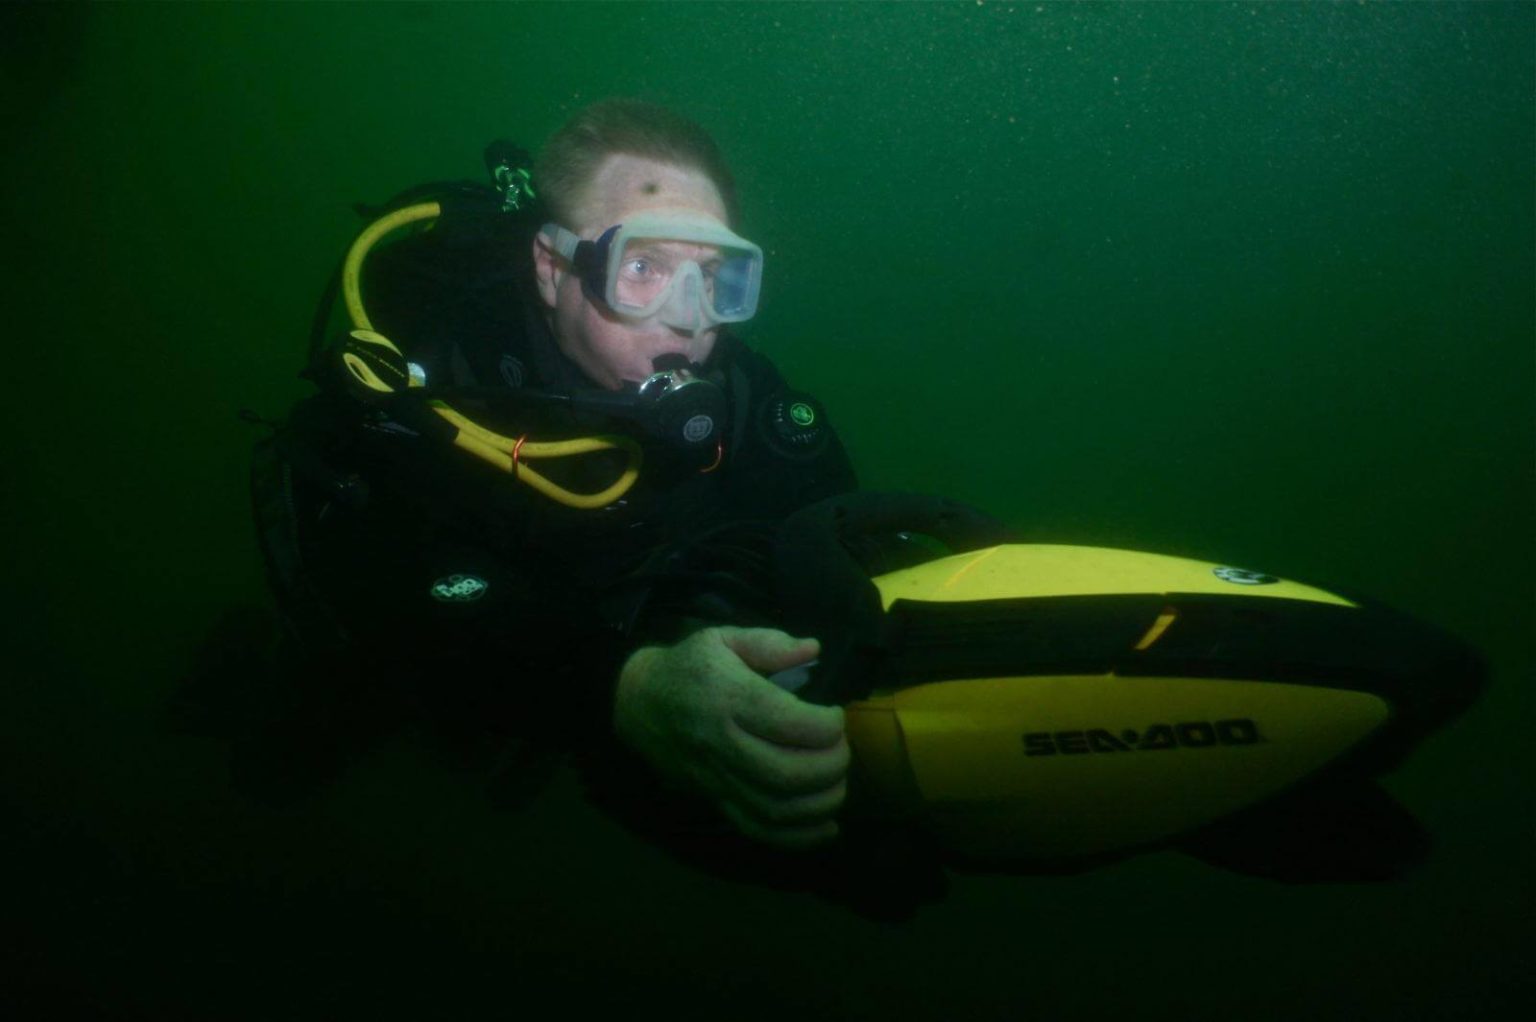 Scuba Diver using an Underwater Scooter